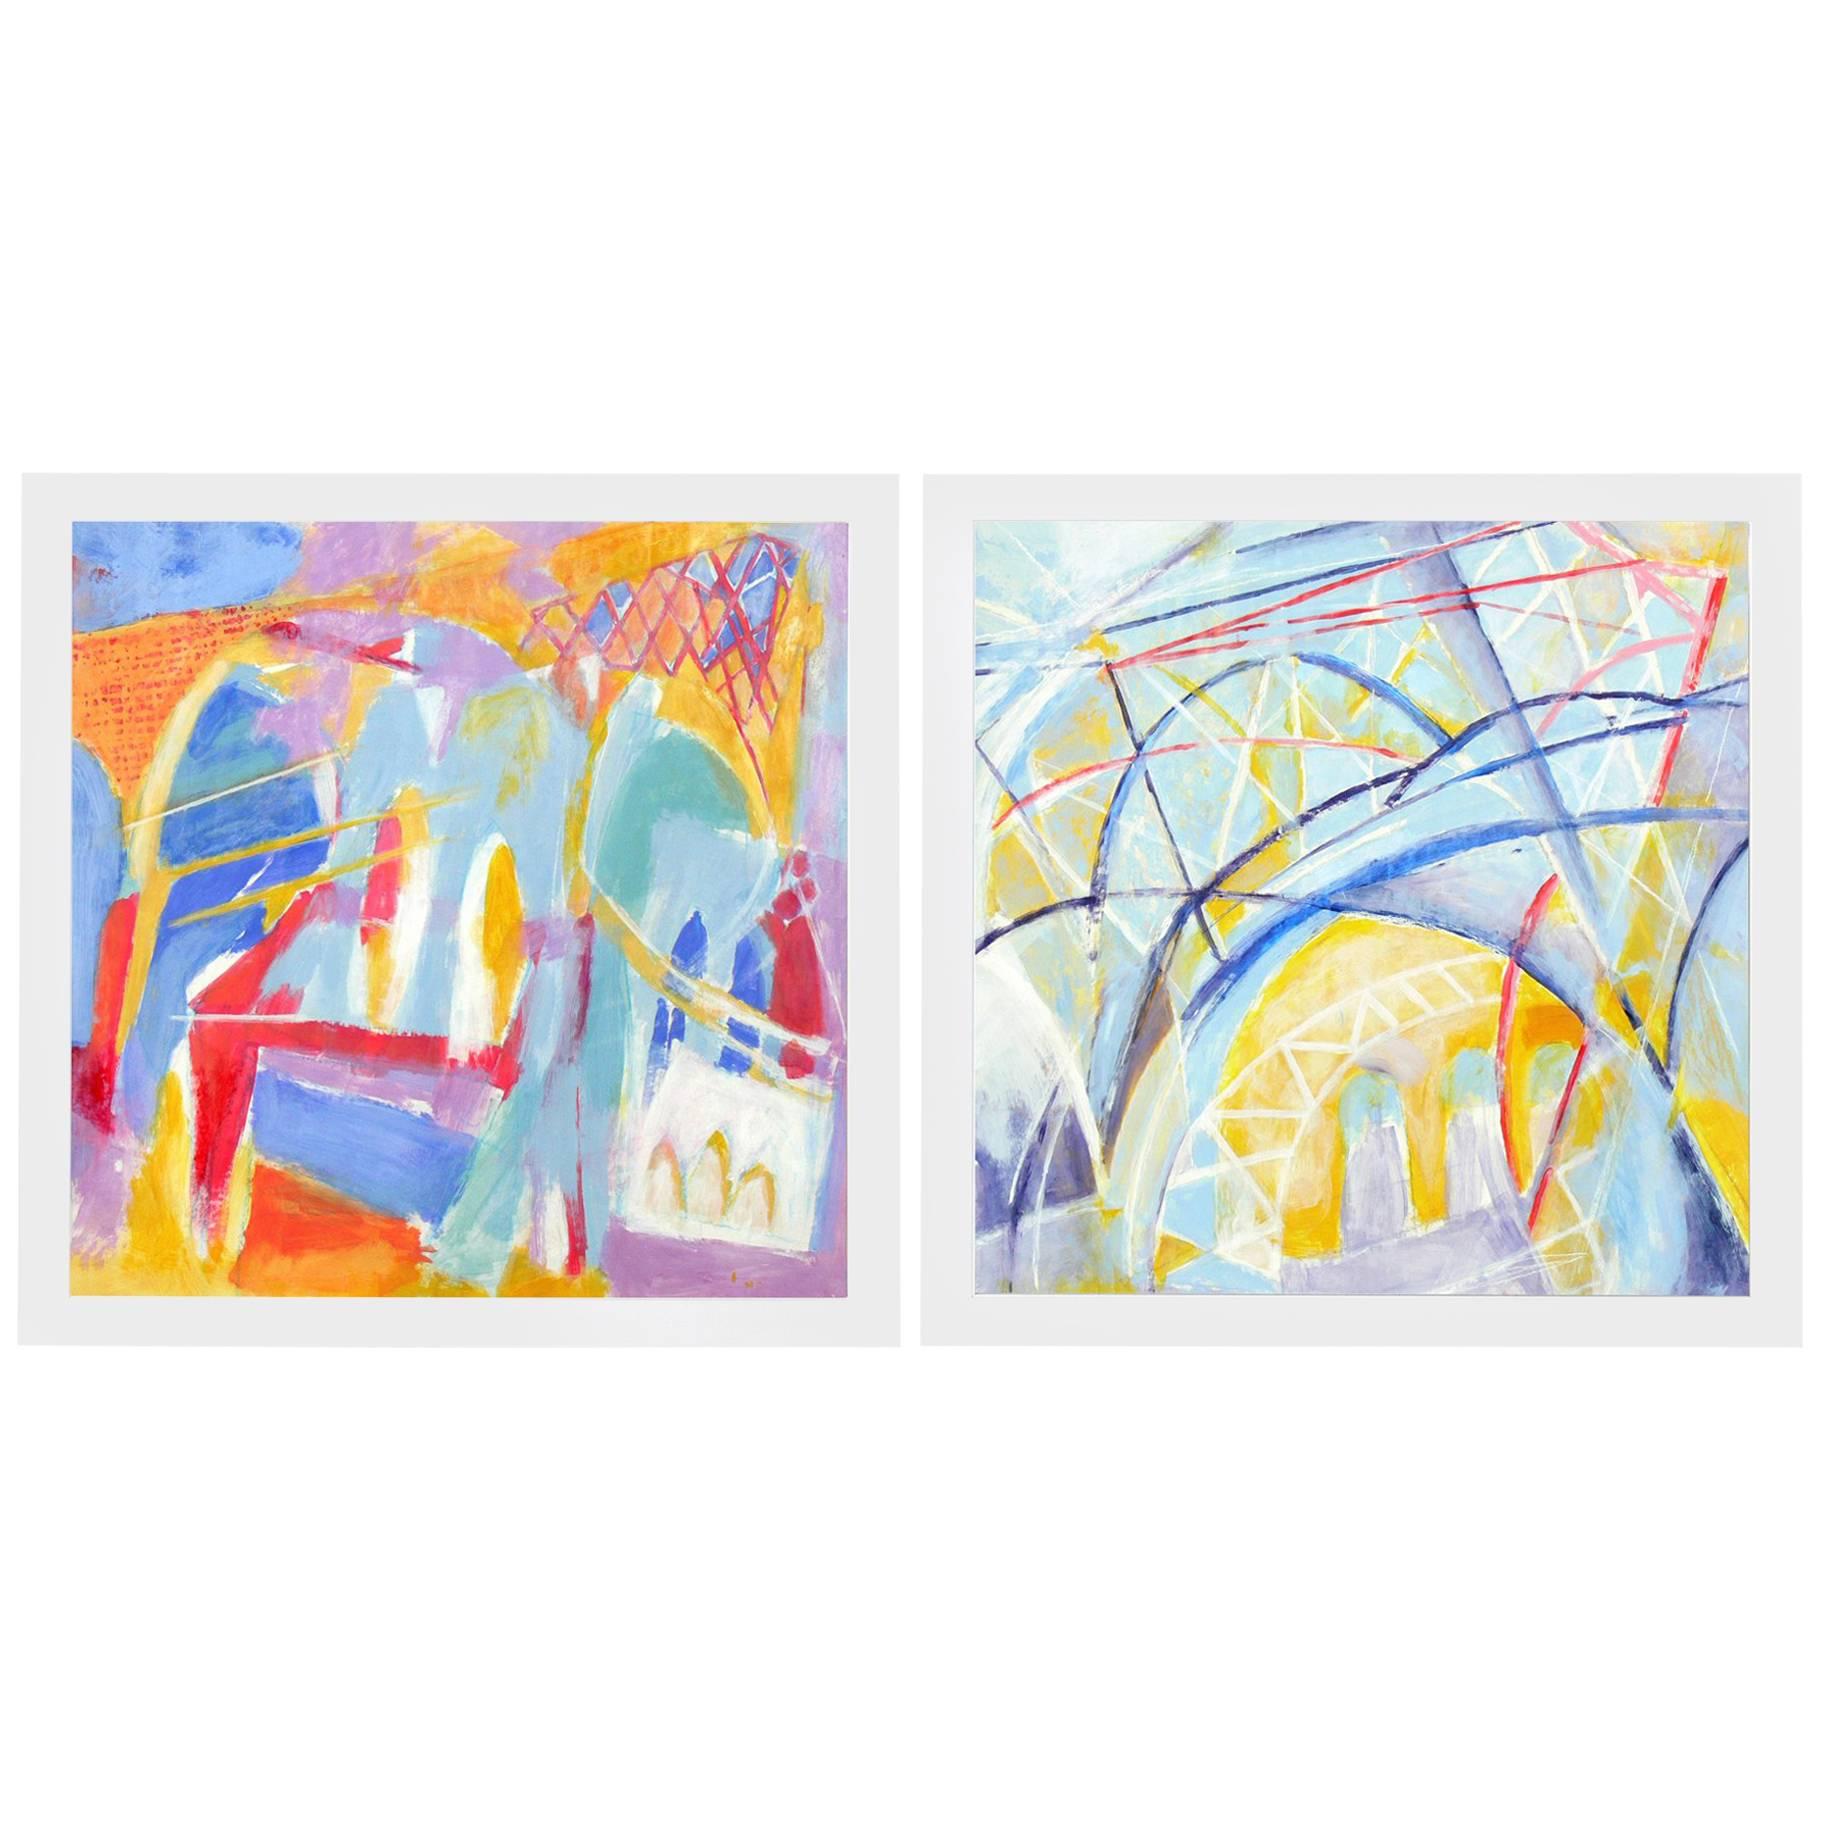 Selection of Large-Scale Abstract Paintings